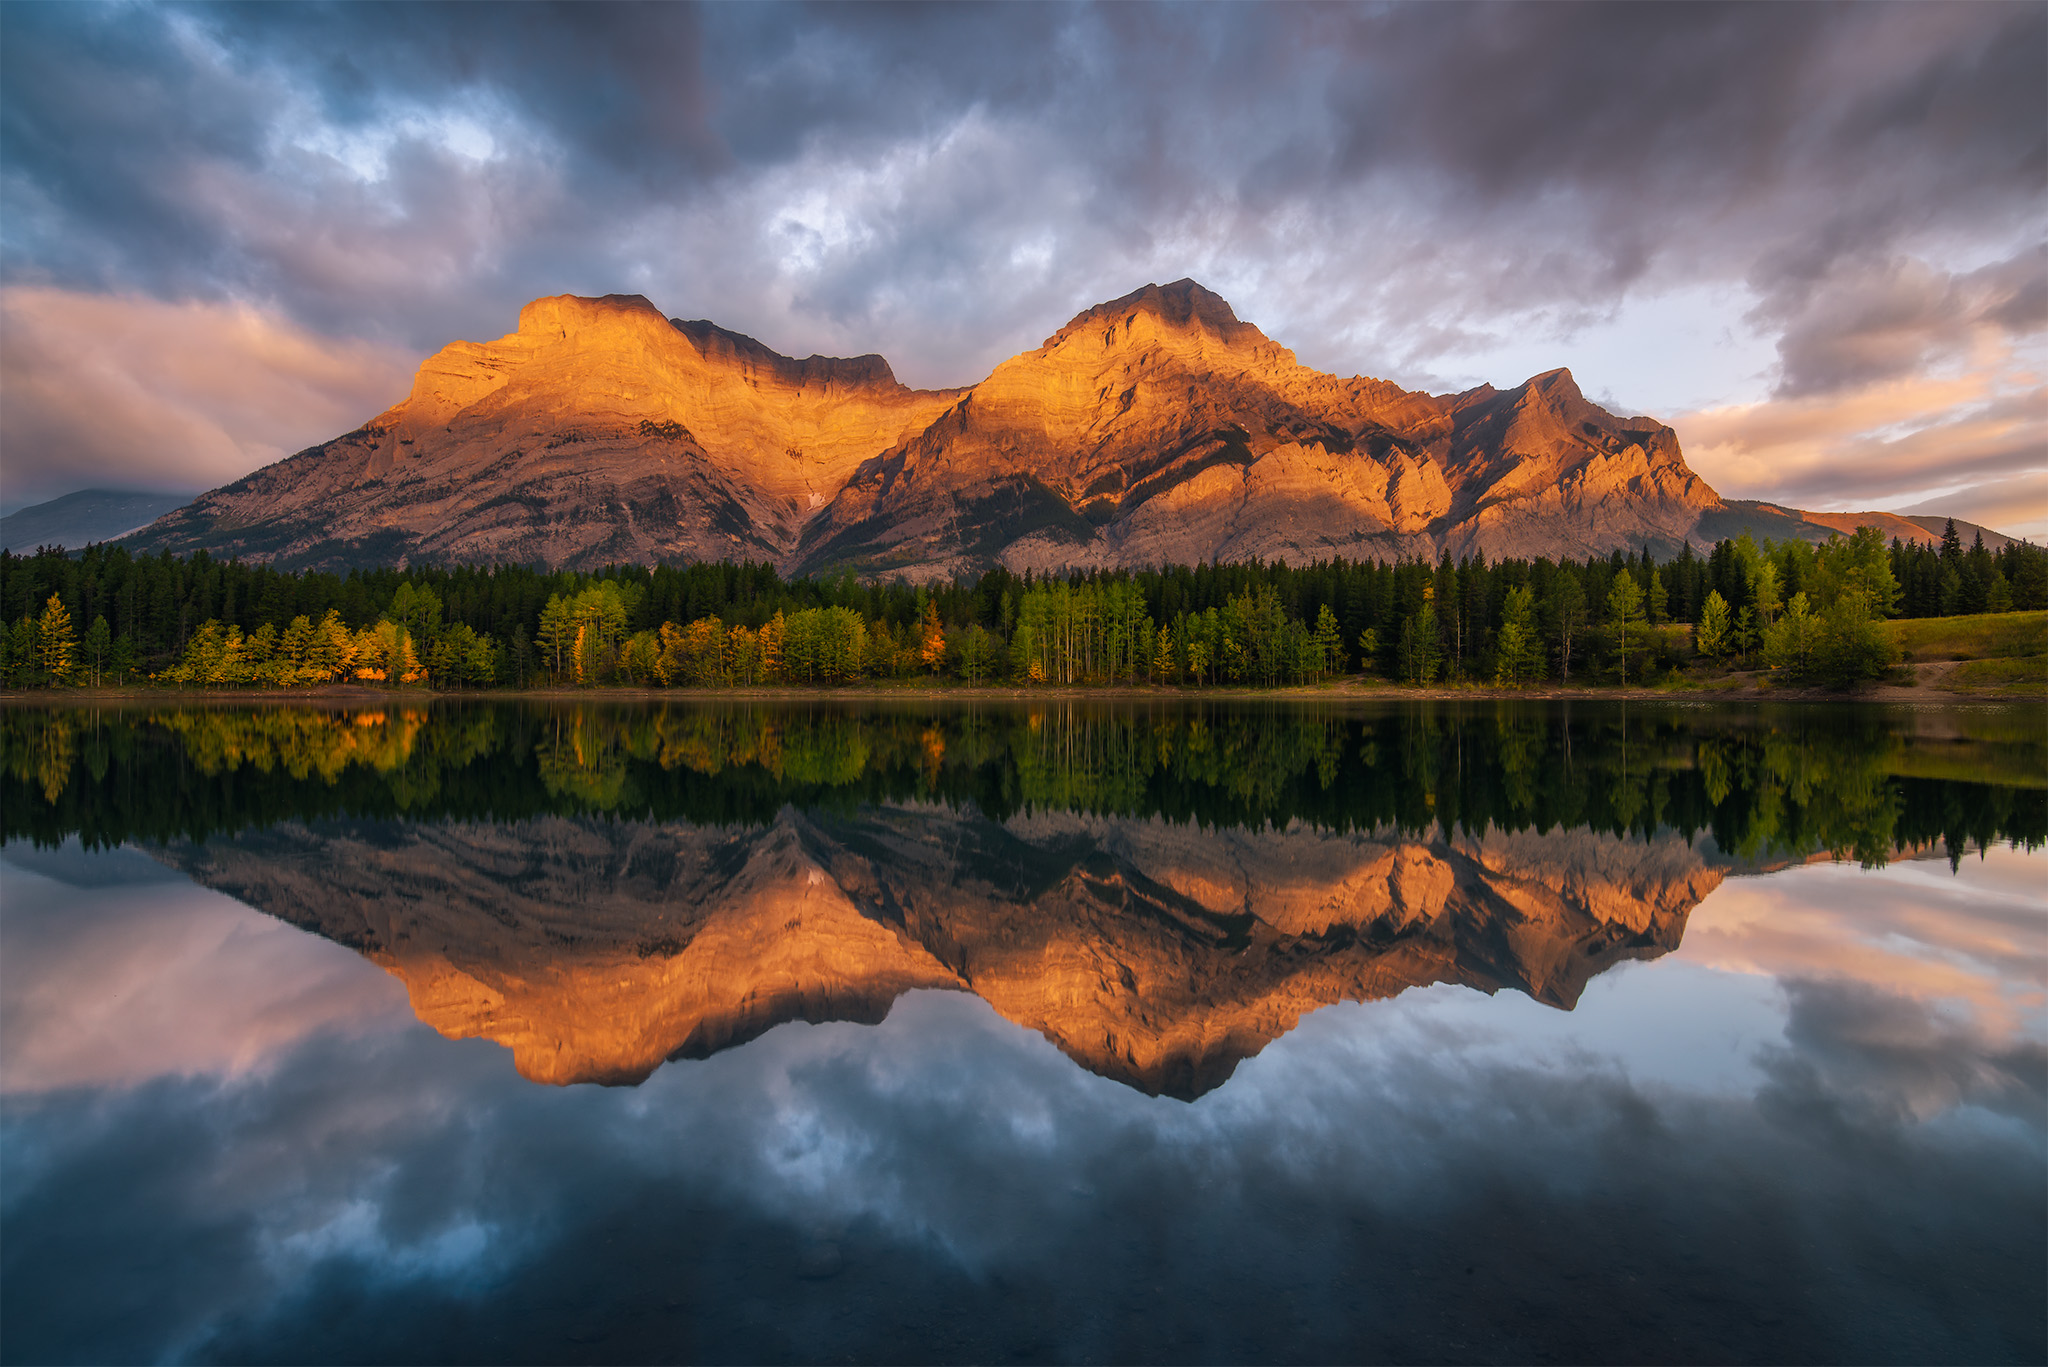 A landscape photograph taken during sunrise at Wedge Pond in the Canadian Rockies